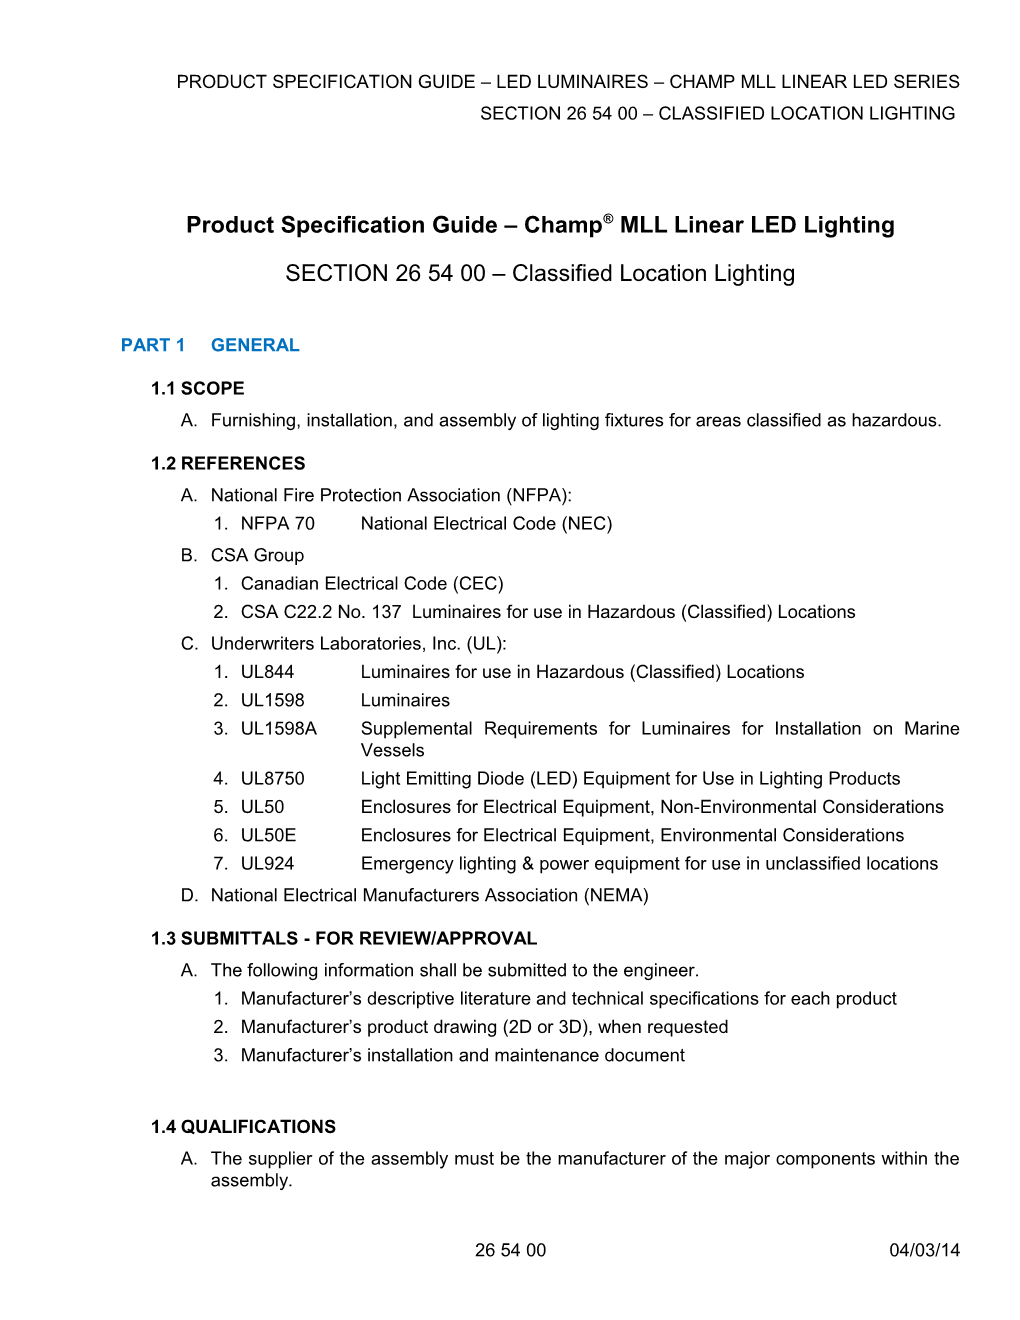 Product Specification Guide Champ MLL Linear LED Lighting